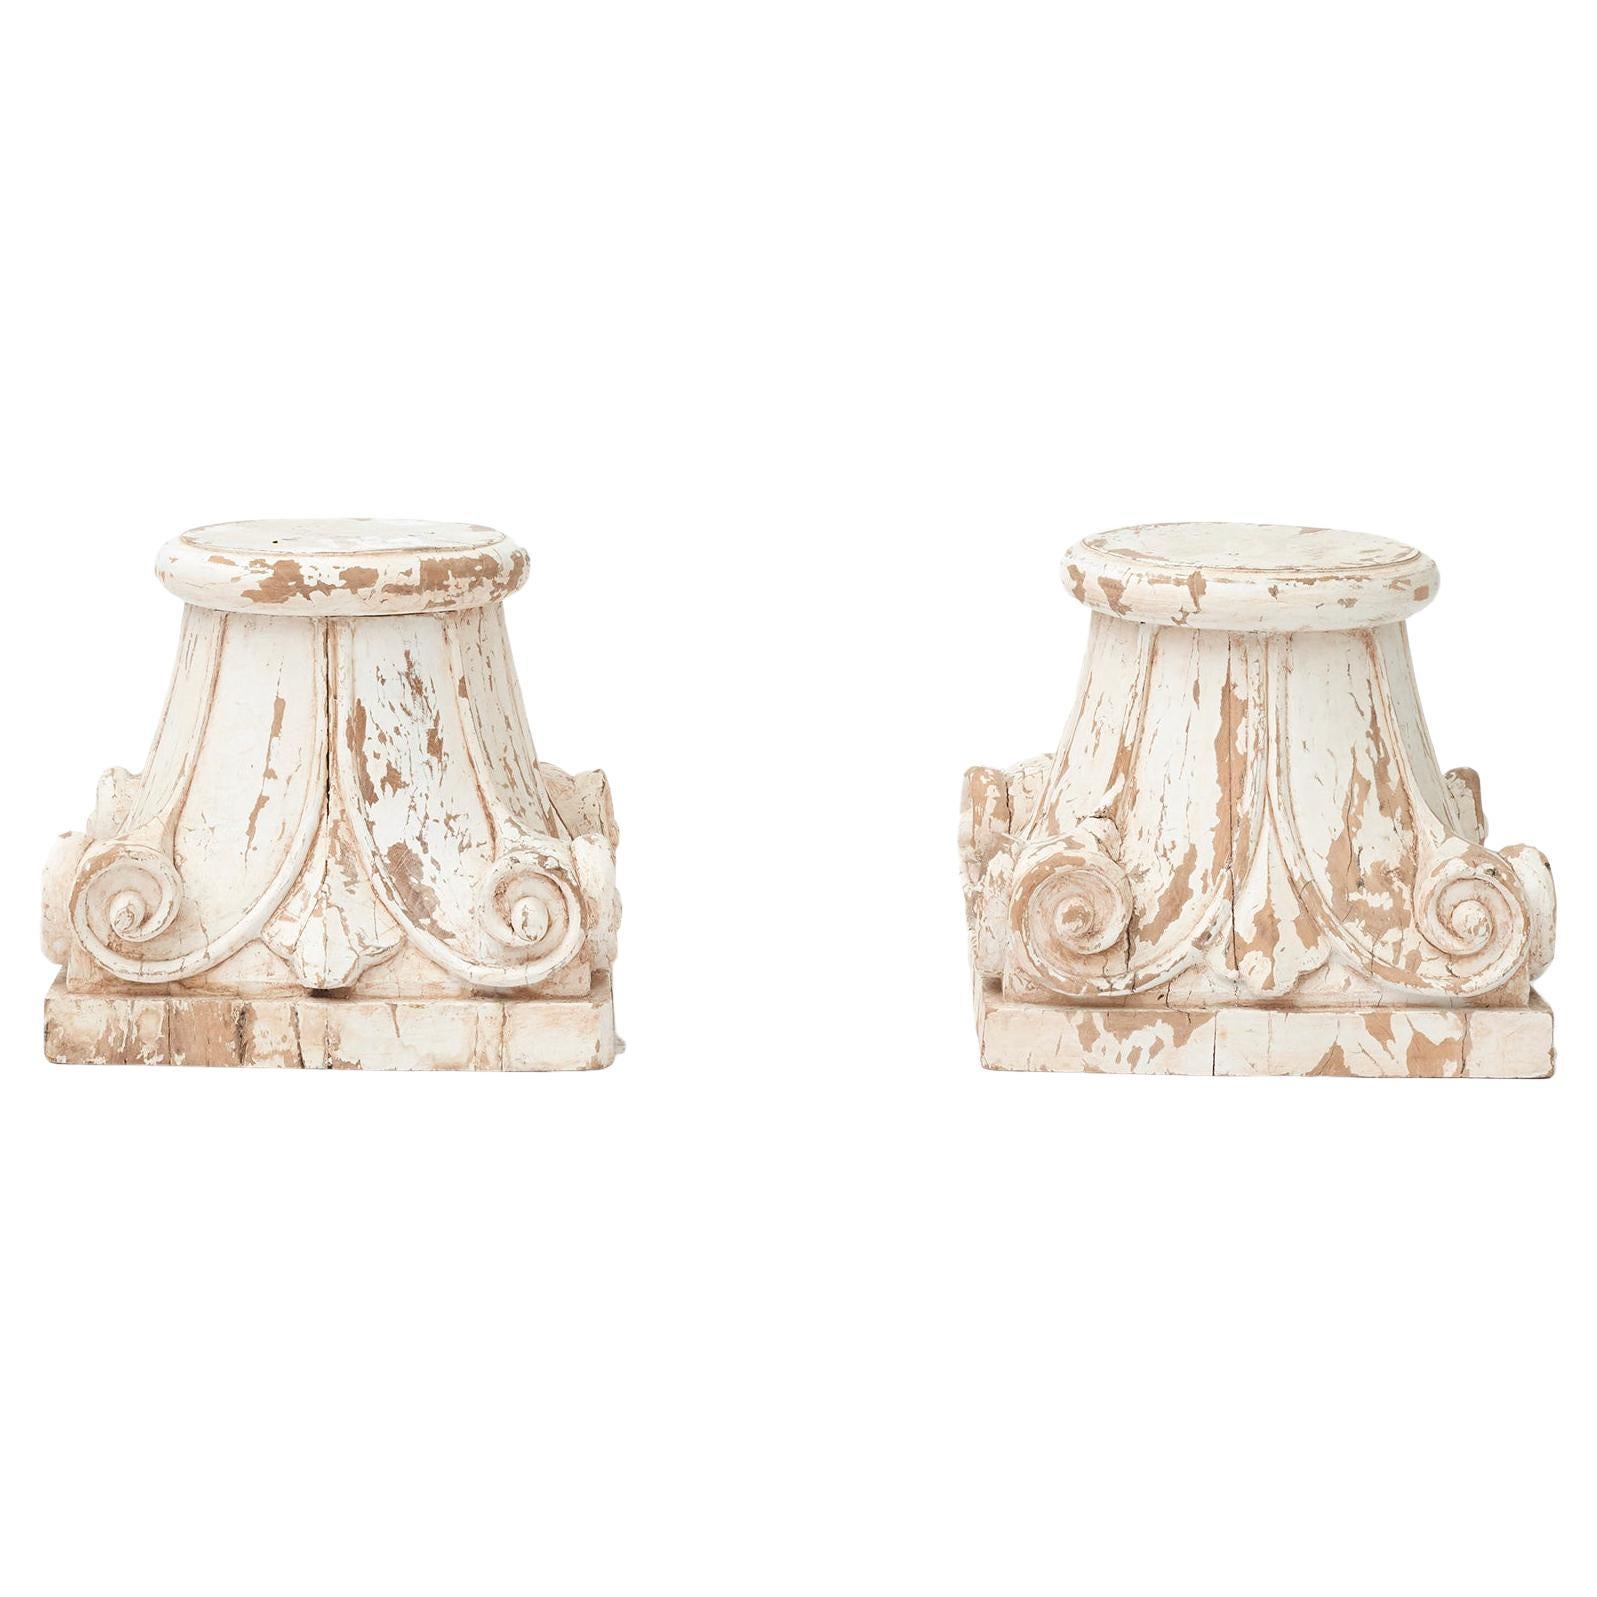 Pair of Wood Capitals, c 1880-1900 For Sale